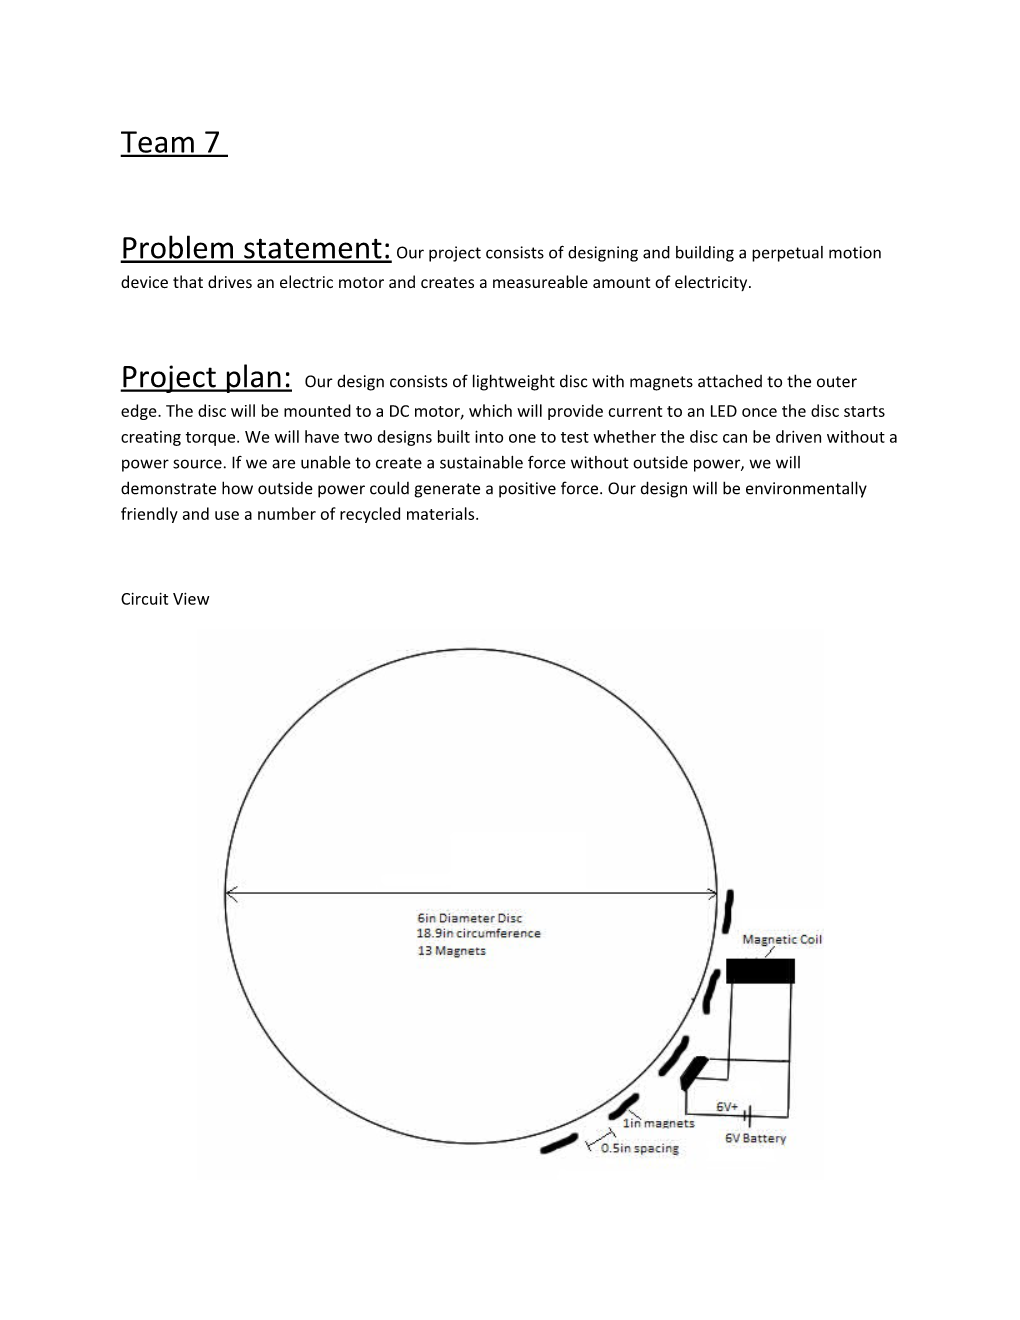 Problem Statement: Our Project Consists of Designing and Building a Perpetual Motion Device